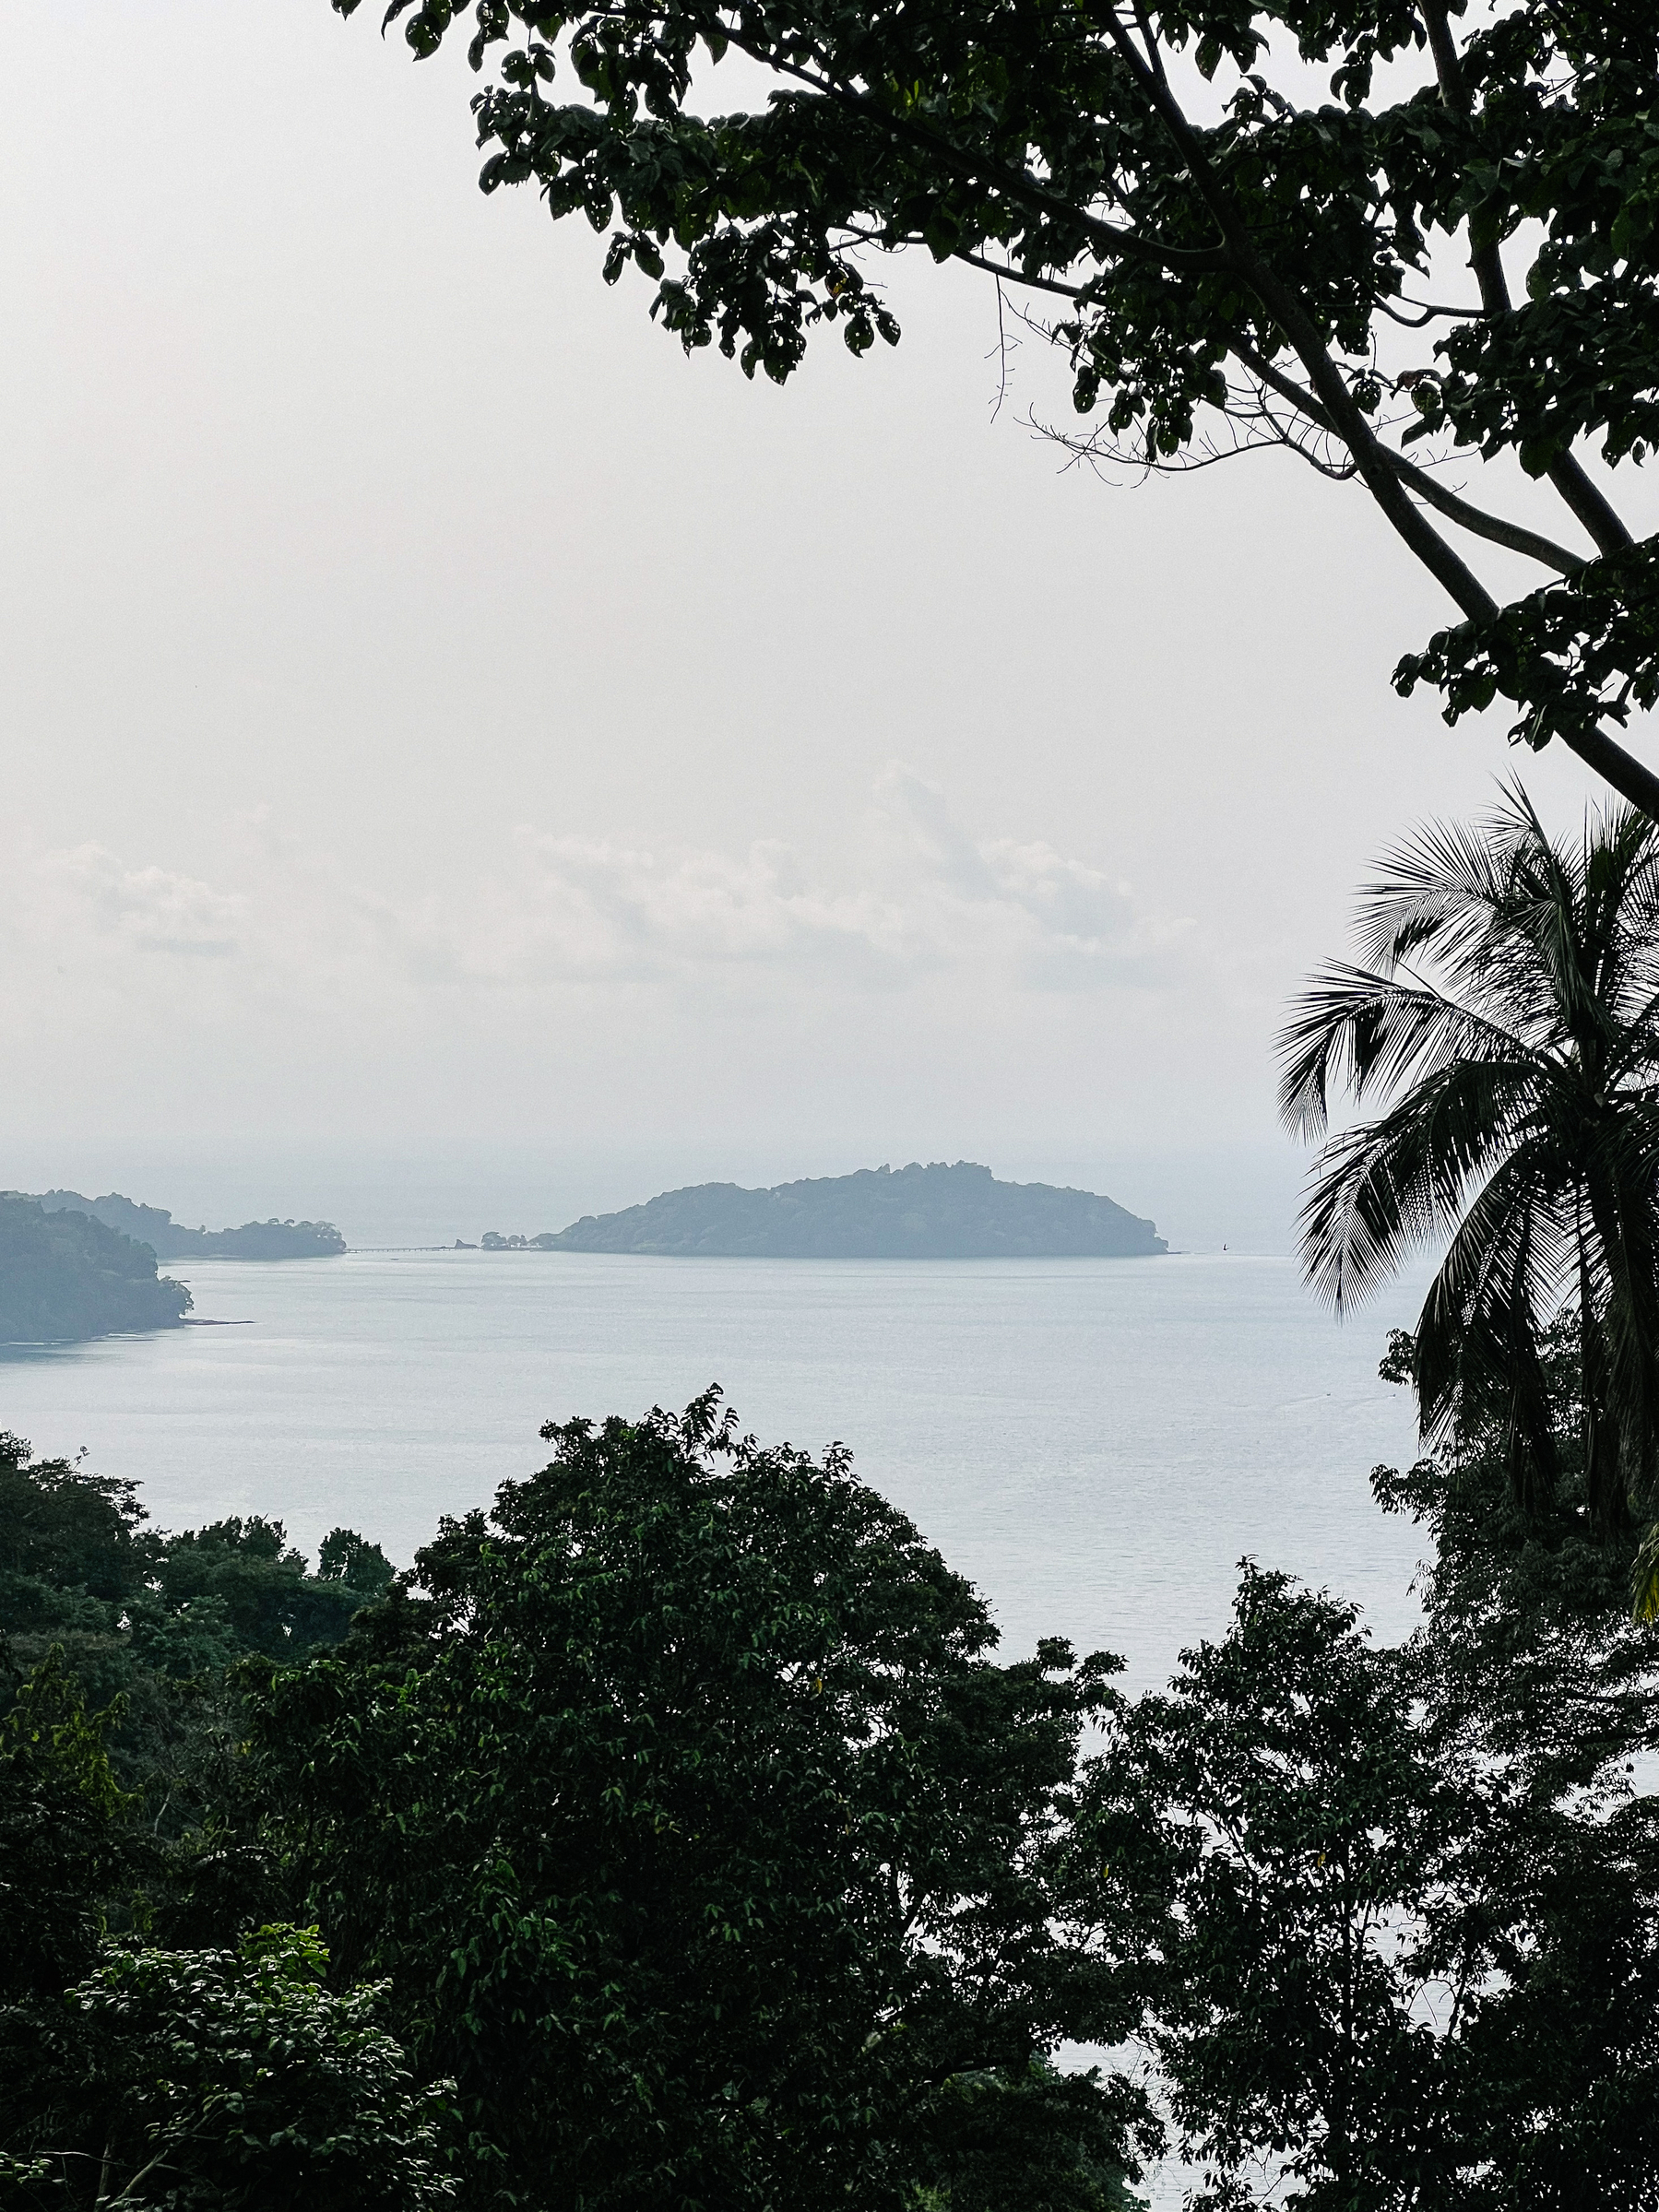 An islet is seen in the distance, with trees on the foreground. 